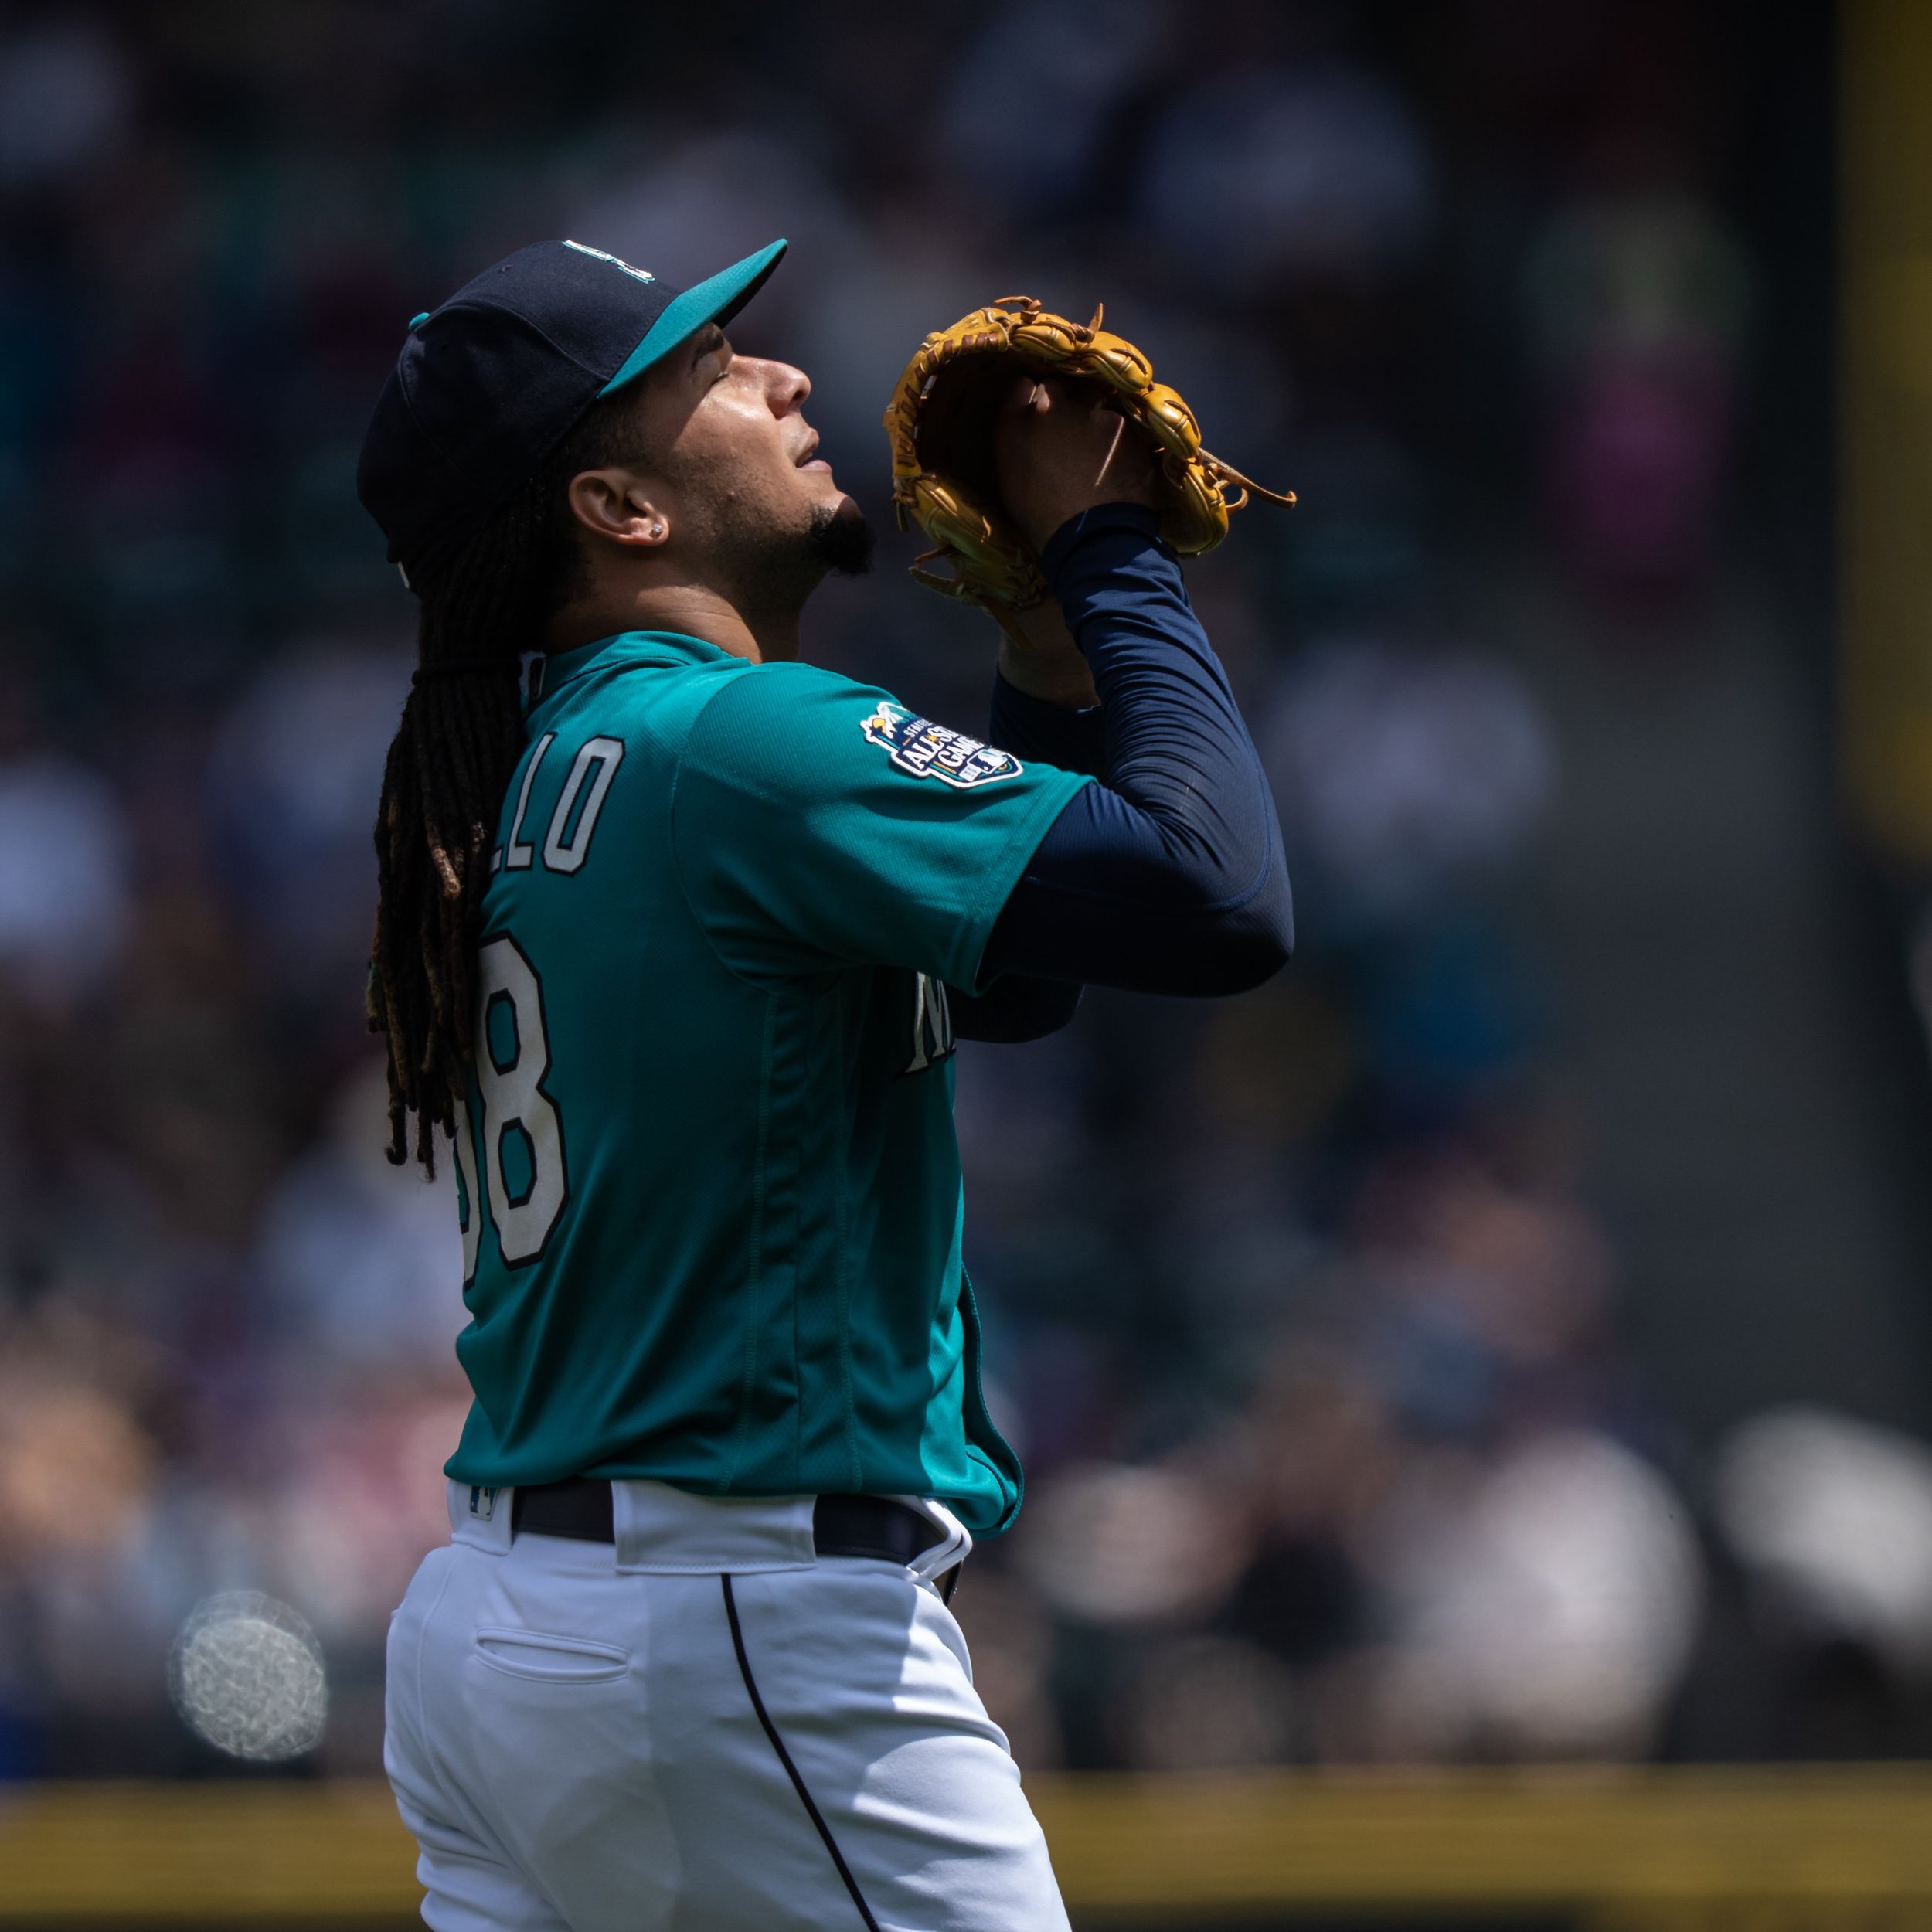 Luis Castillo goes seven innings as Mariners top Nationals